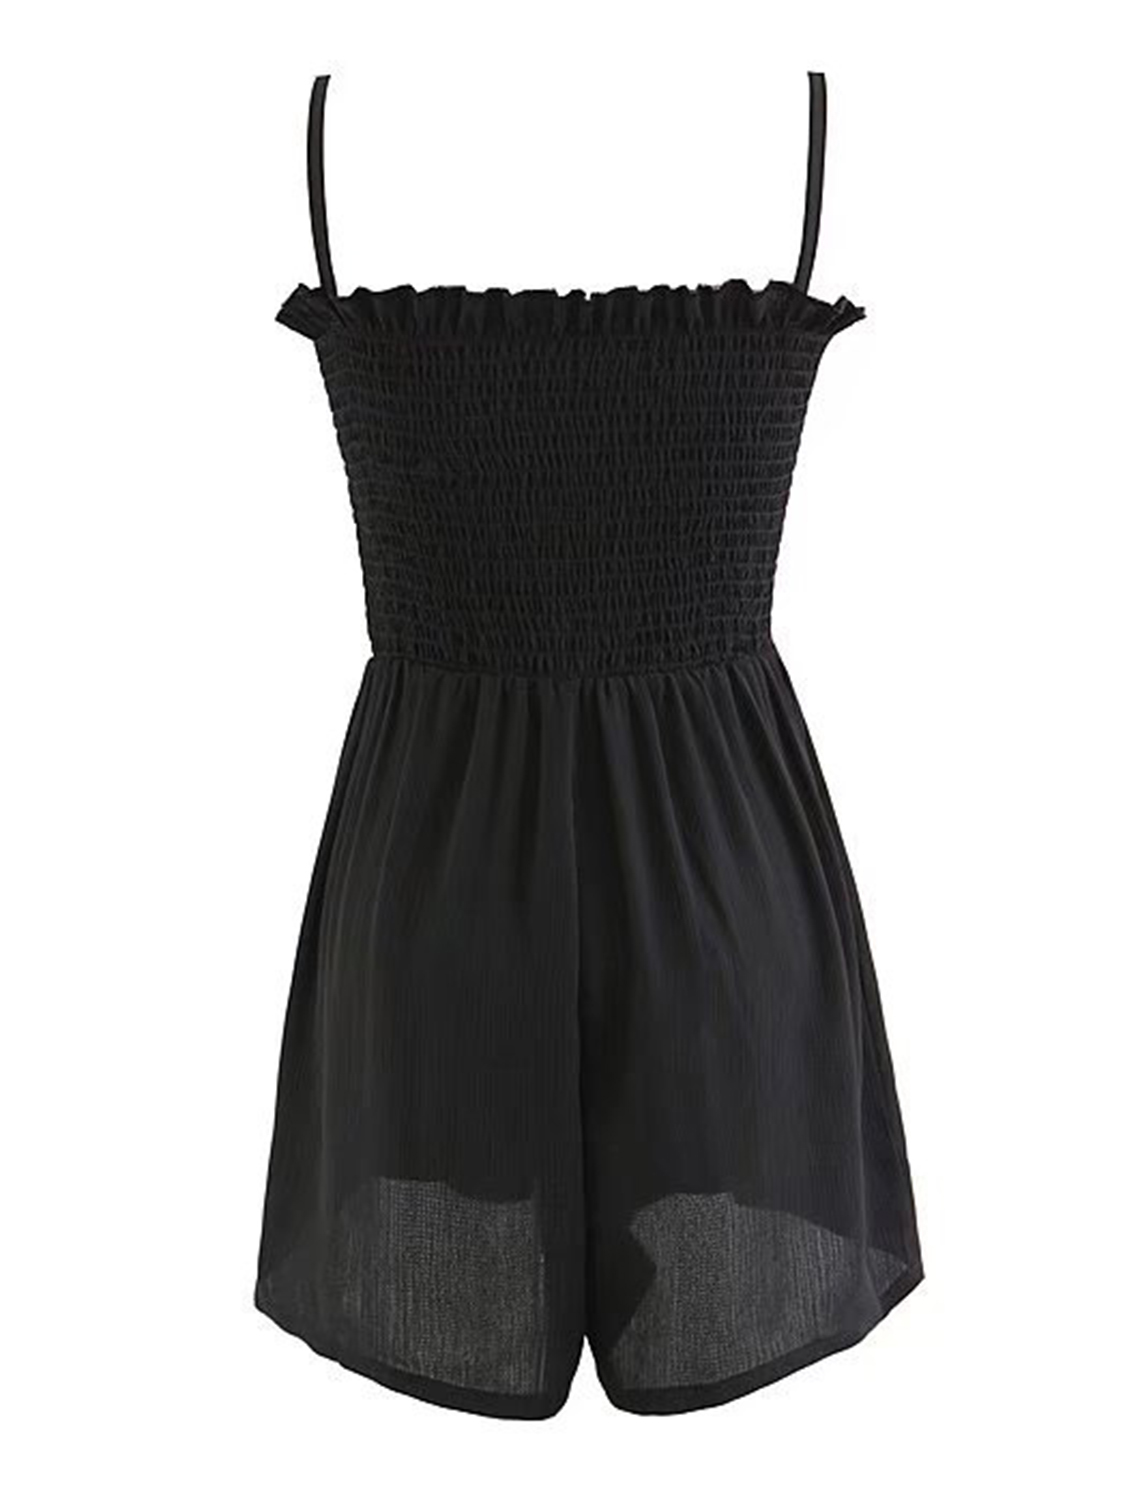 Black Spaghetti Strap Stretch Lace Up Front Romper Playsuit | Choies